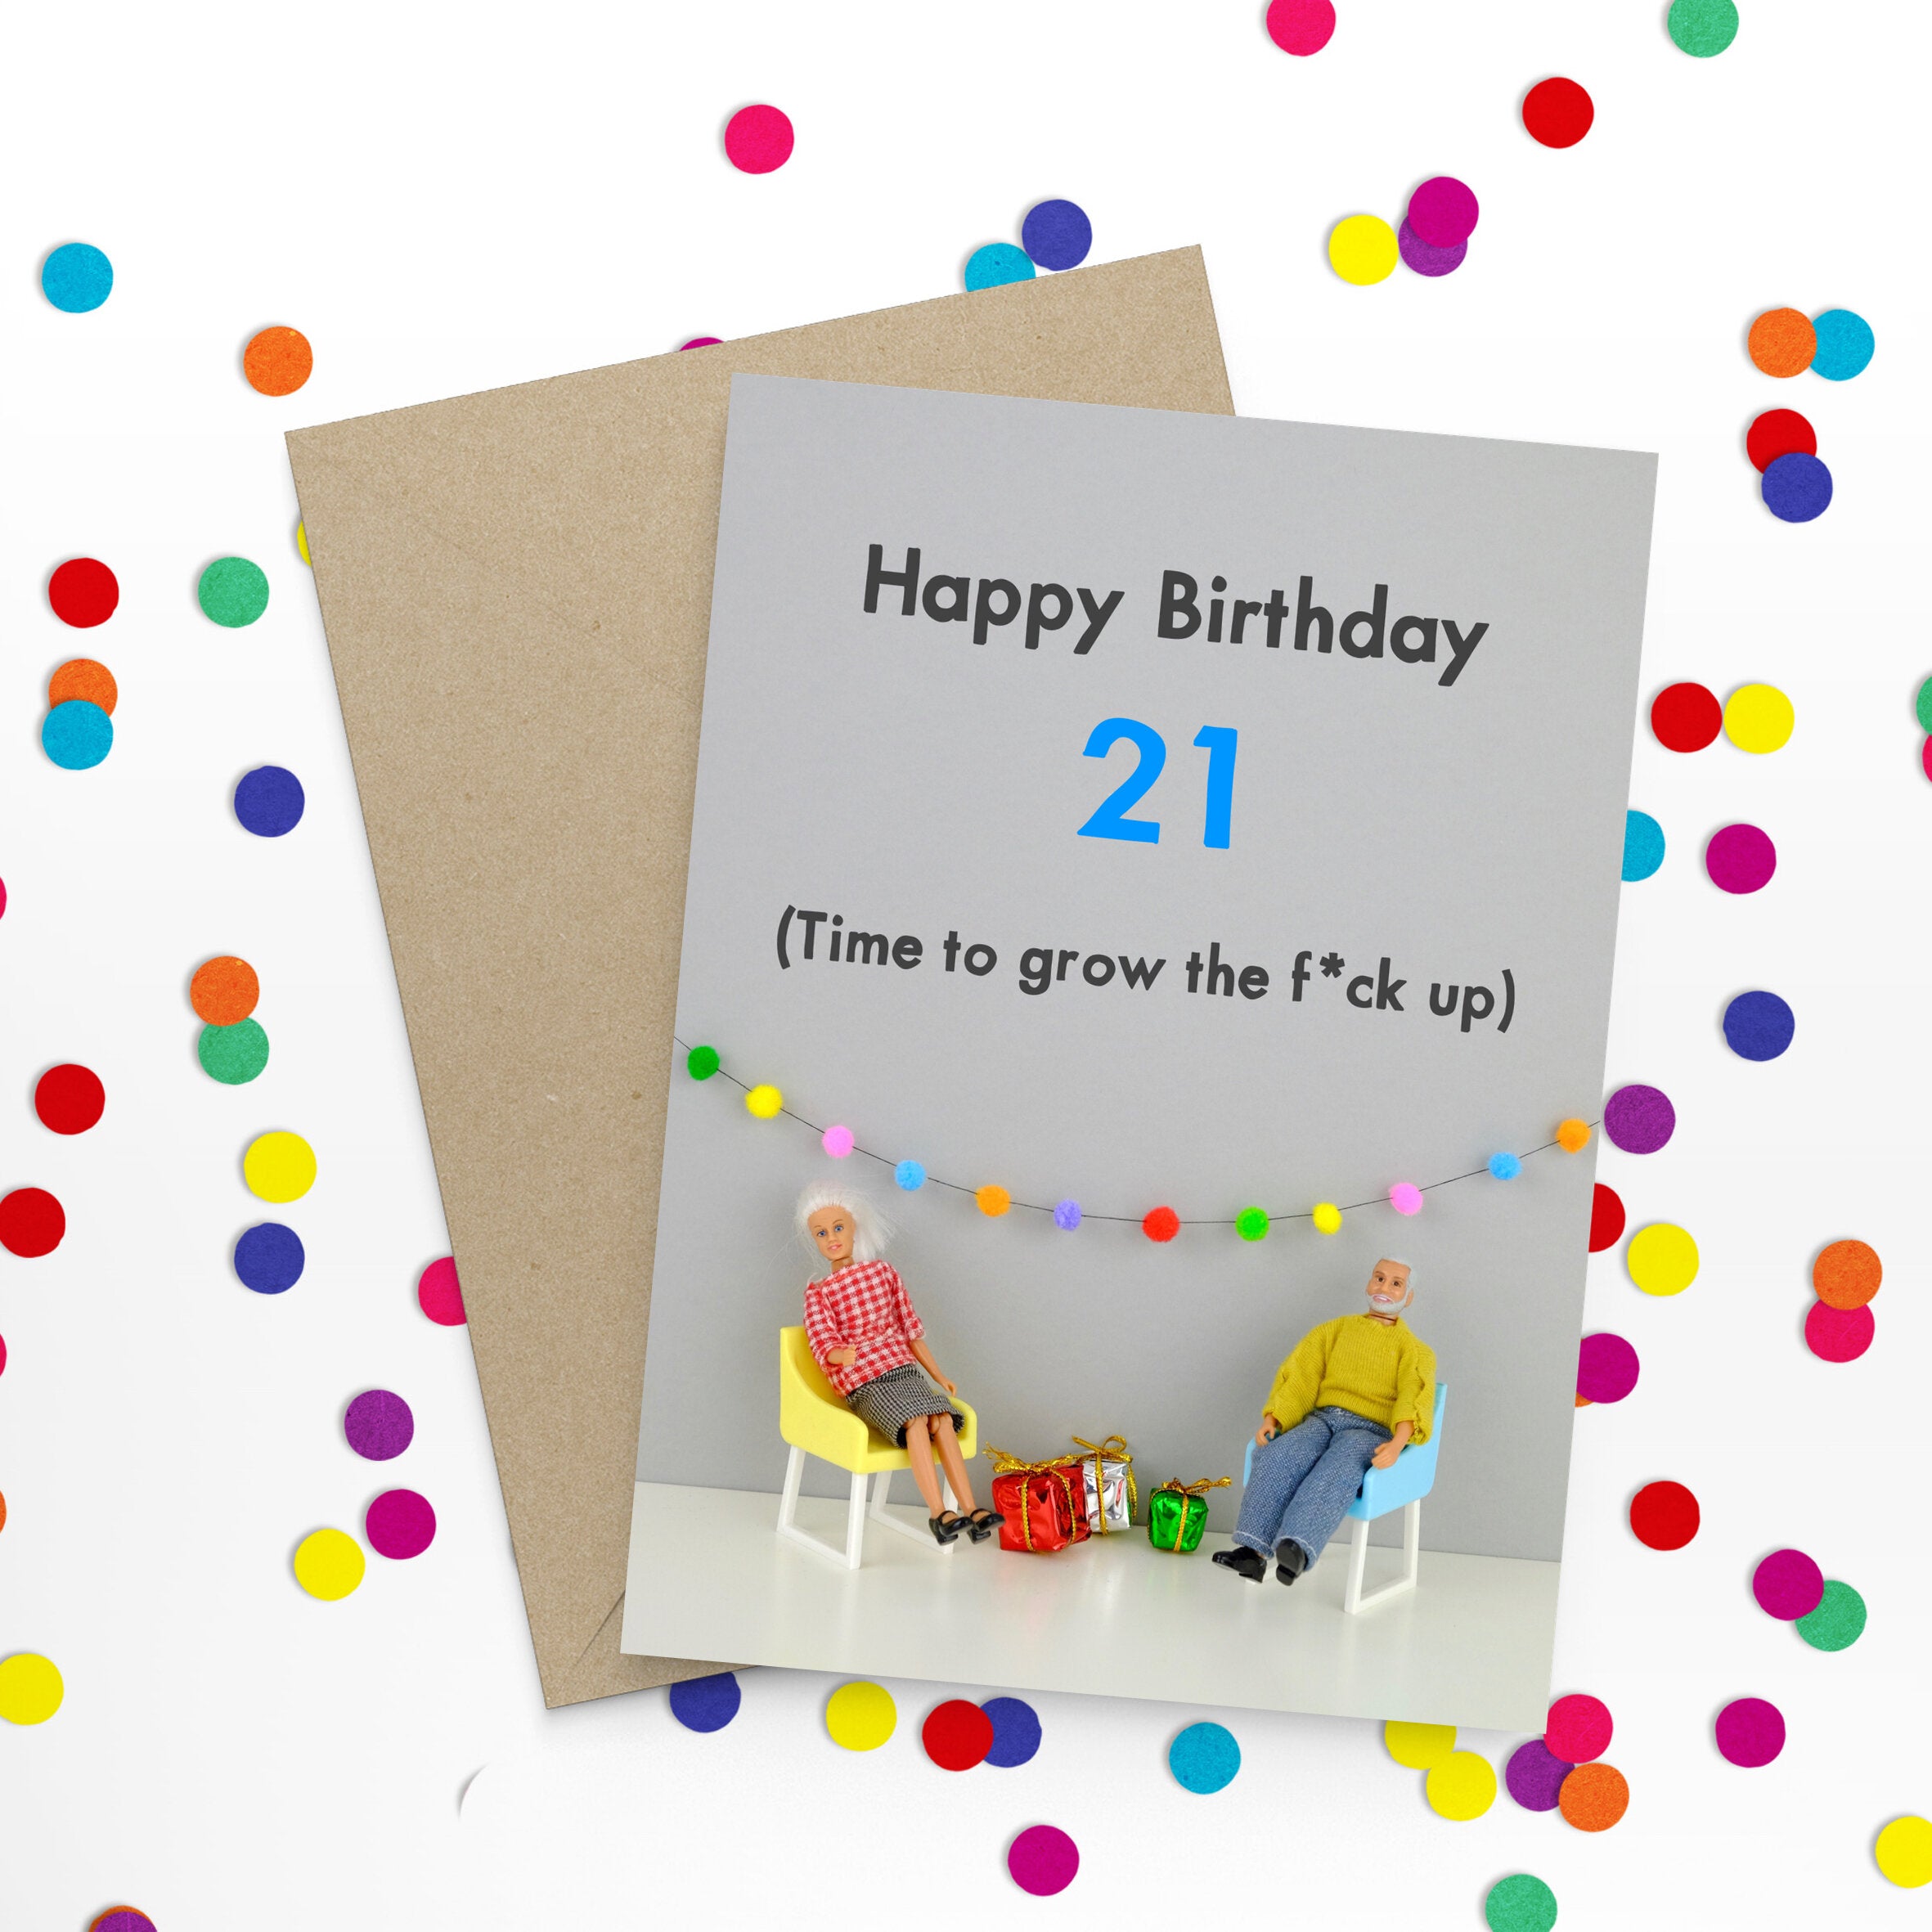 Happy Birthday 21 (time to grow the f*uck up) Greetings Card by Bold and Bright